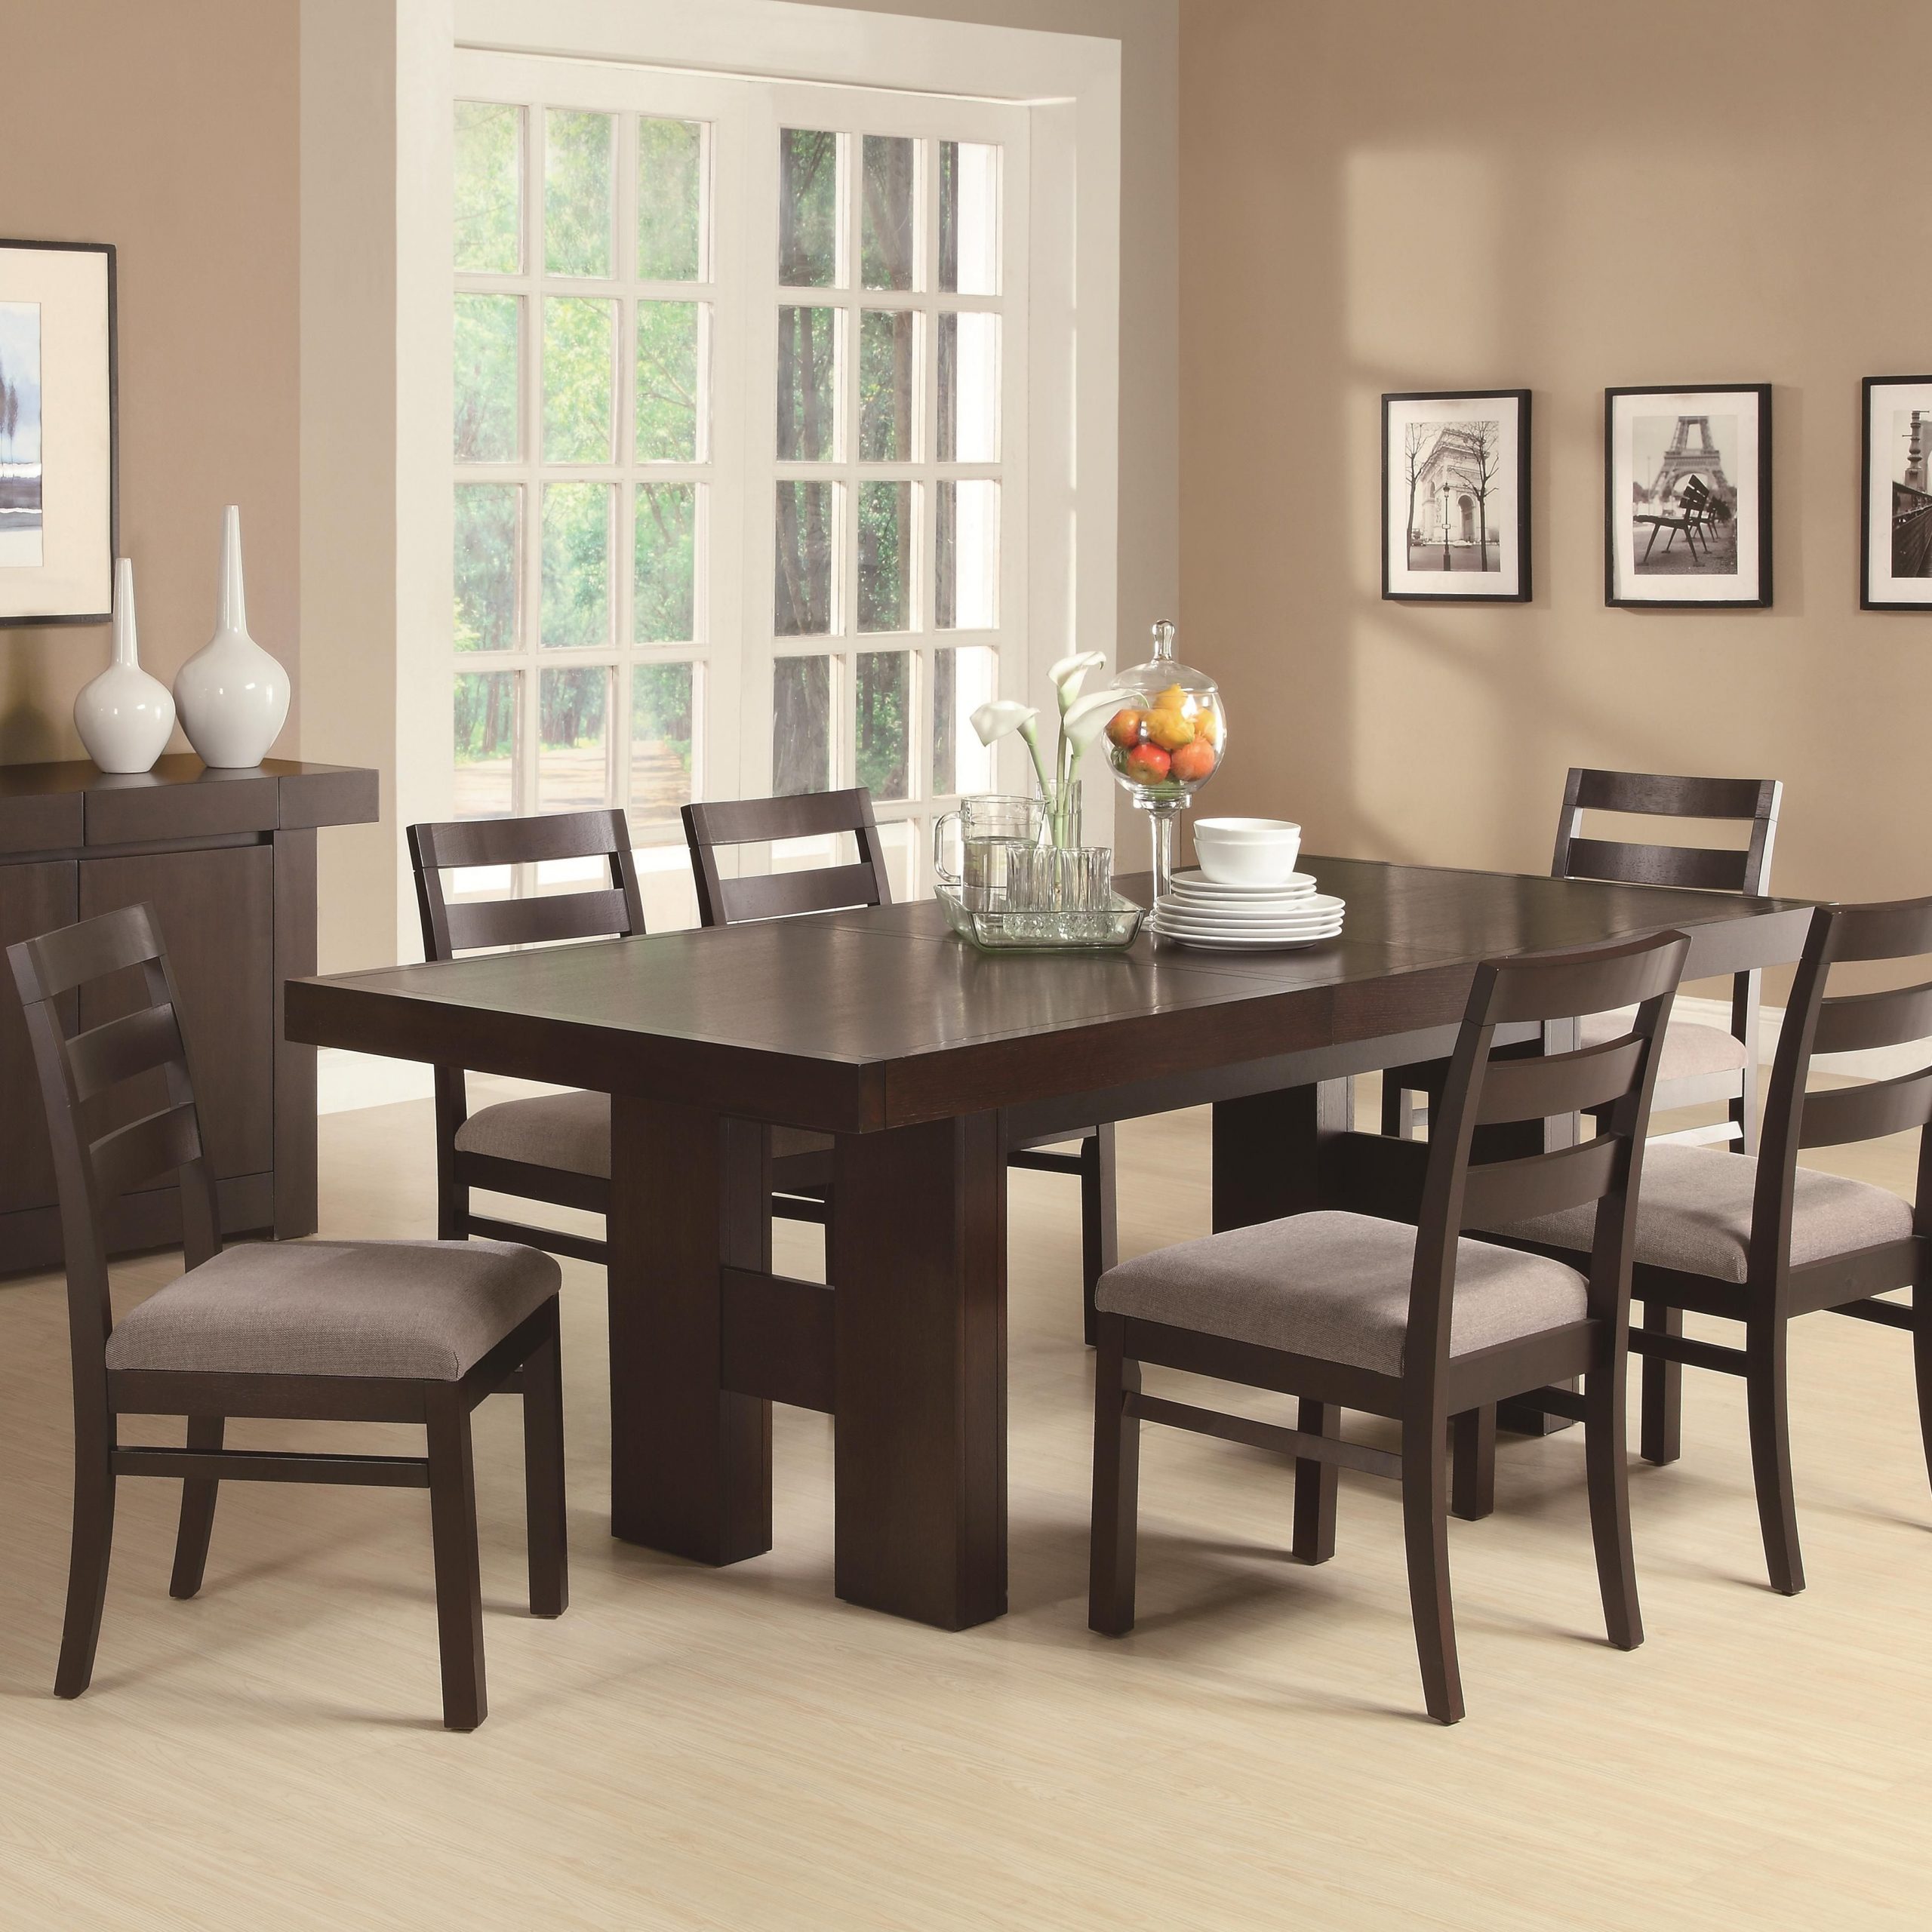 Dabny 7 Piece Rectangular Dining Table Set With Pull Out in size 3604 X 3604